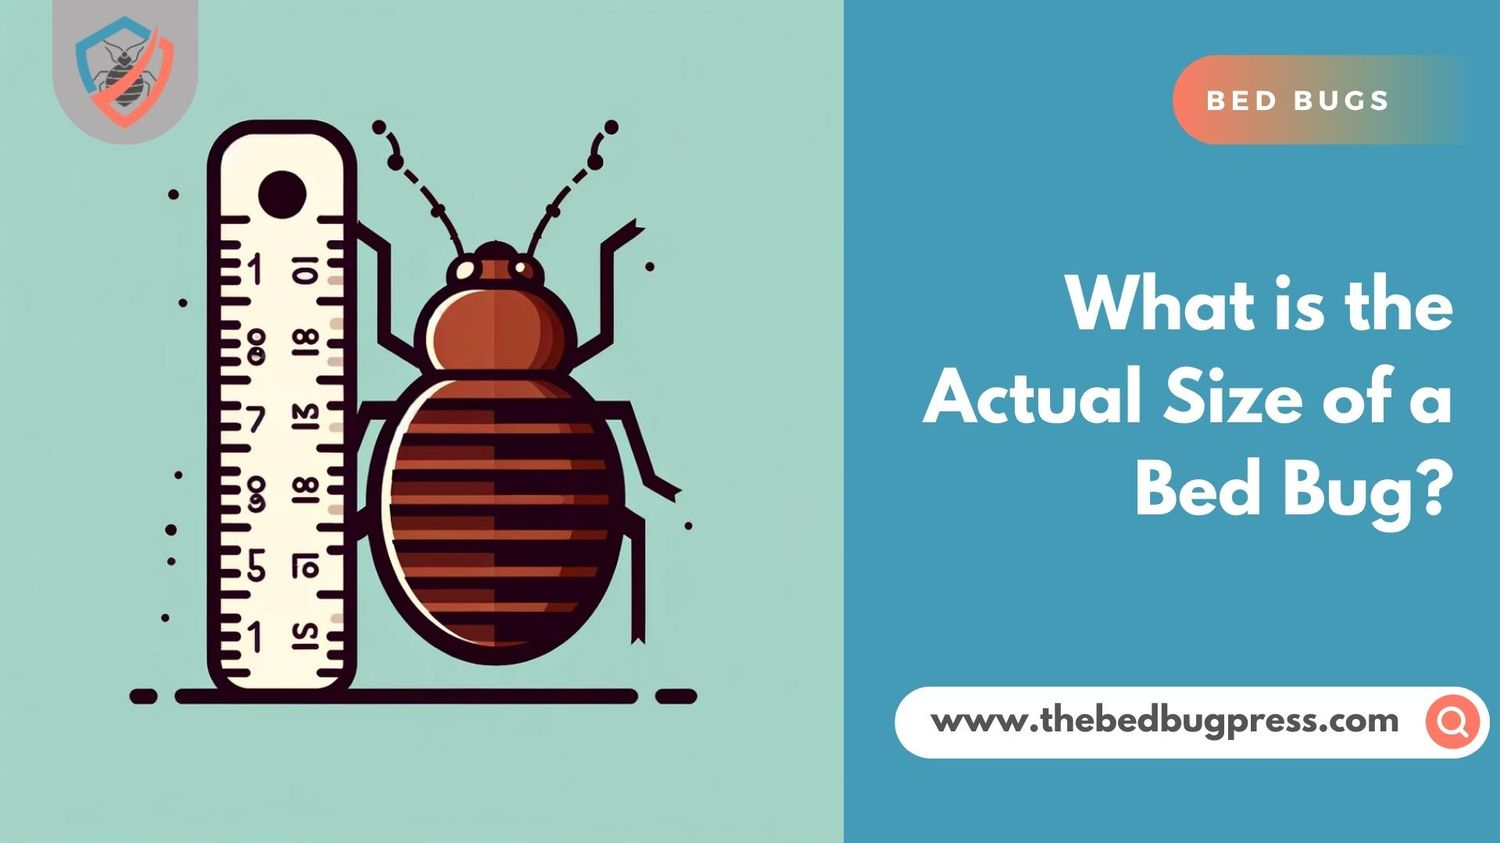 What is the Actual Size of a Bed Bug